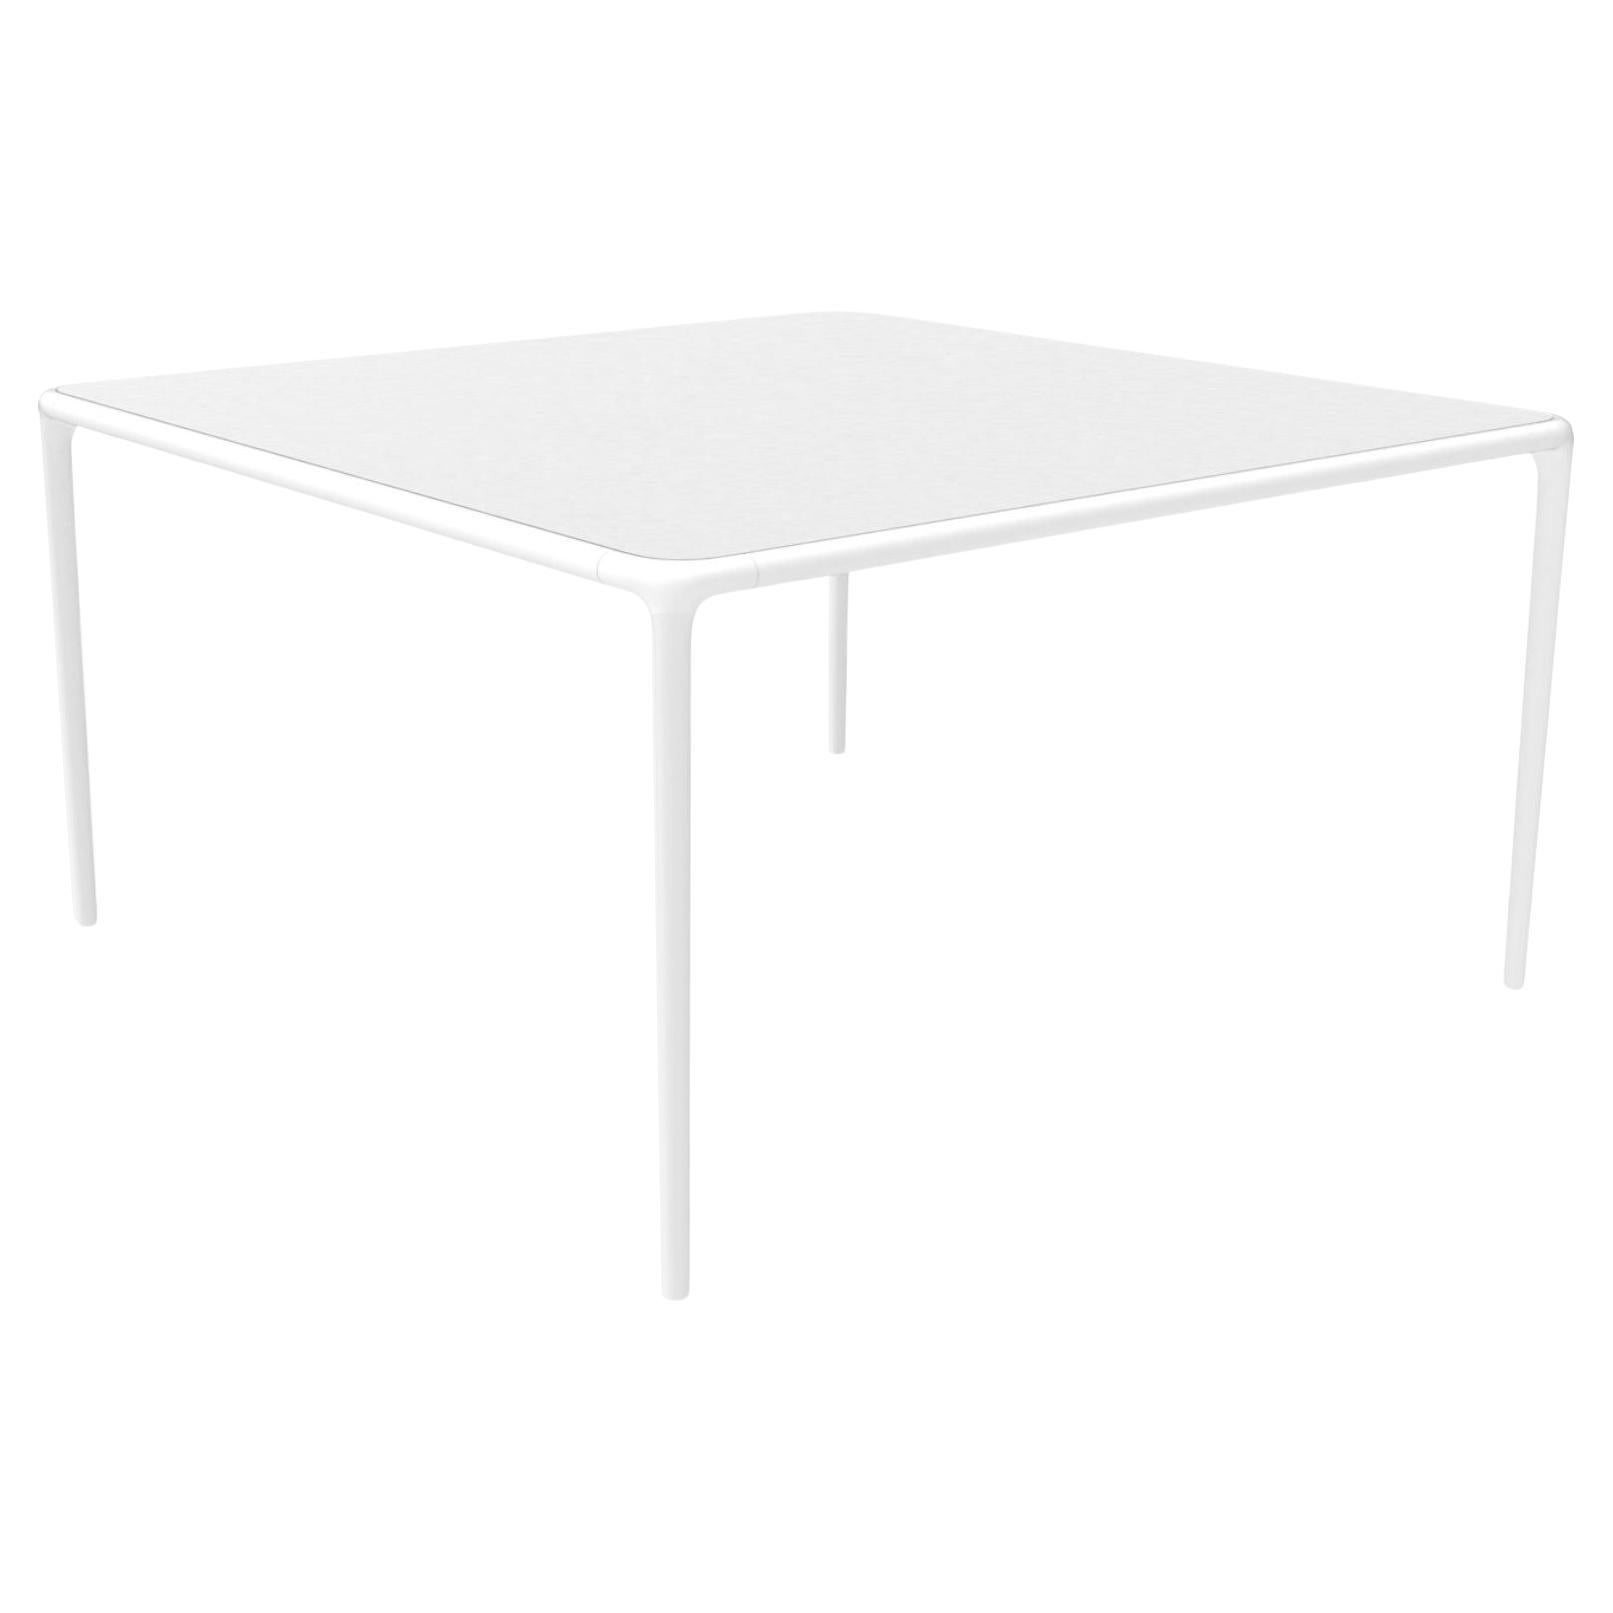 Xaloc White Glass Top Table 140 by Mowee For Sale